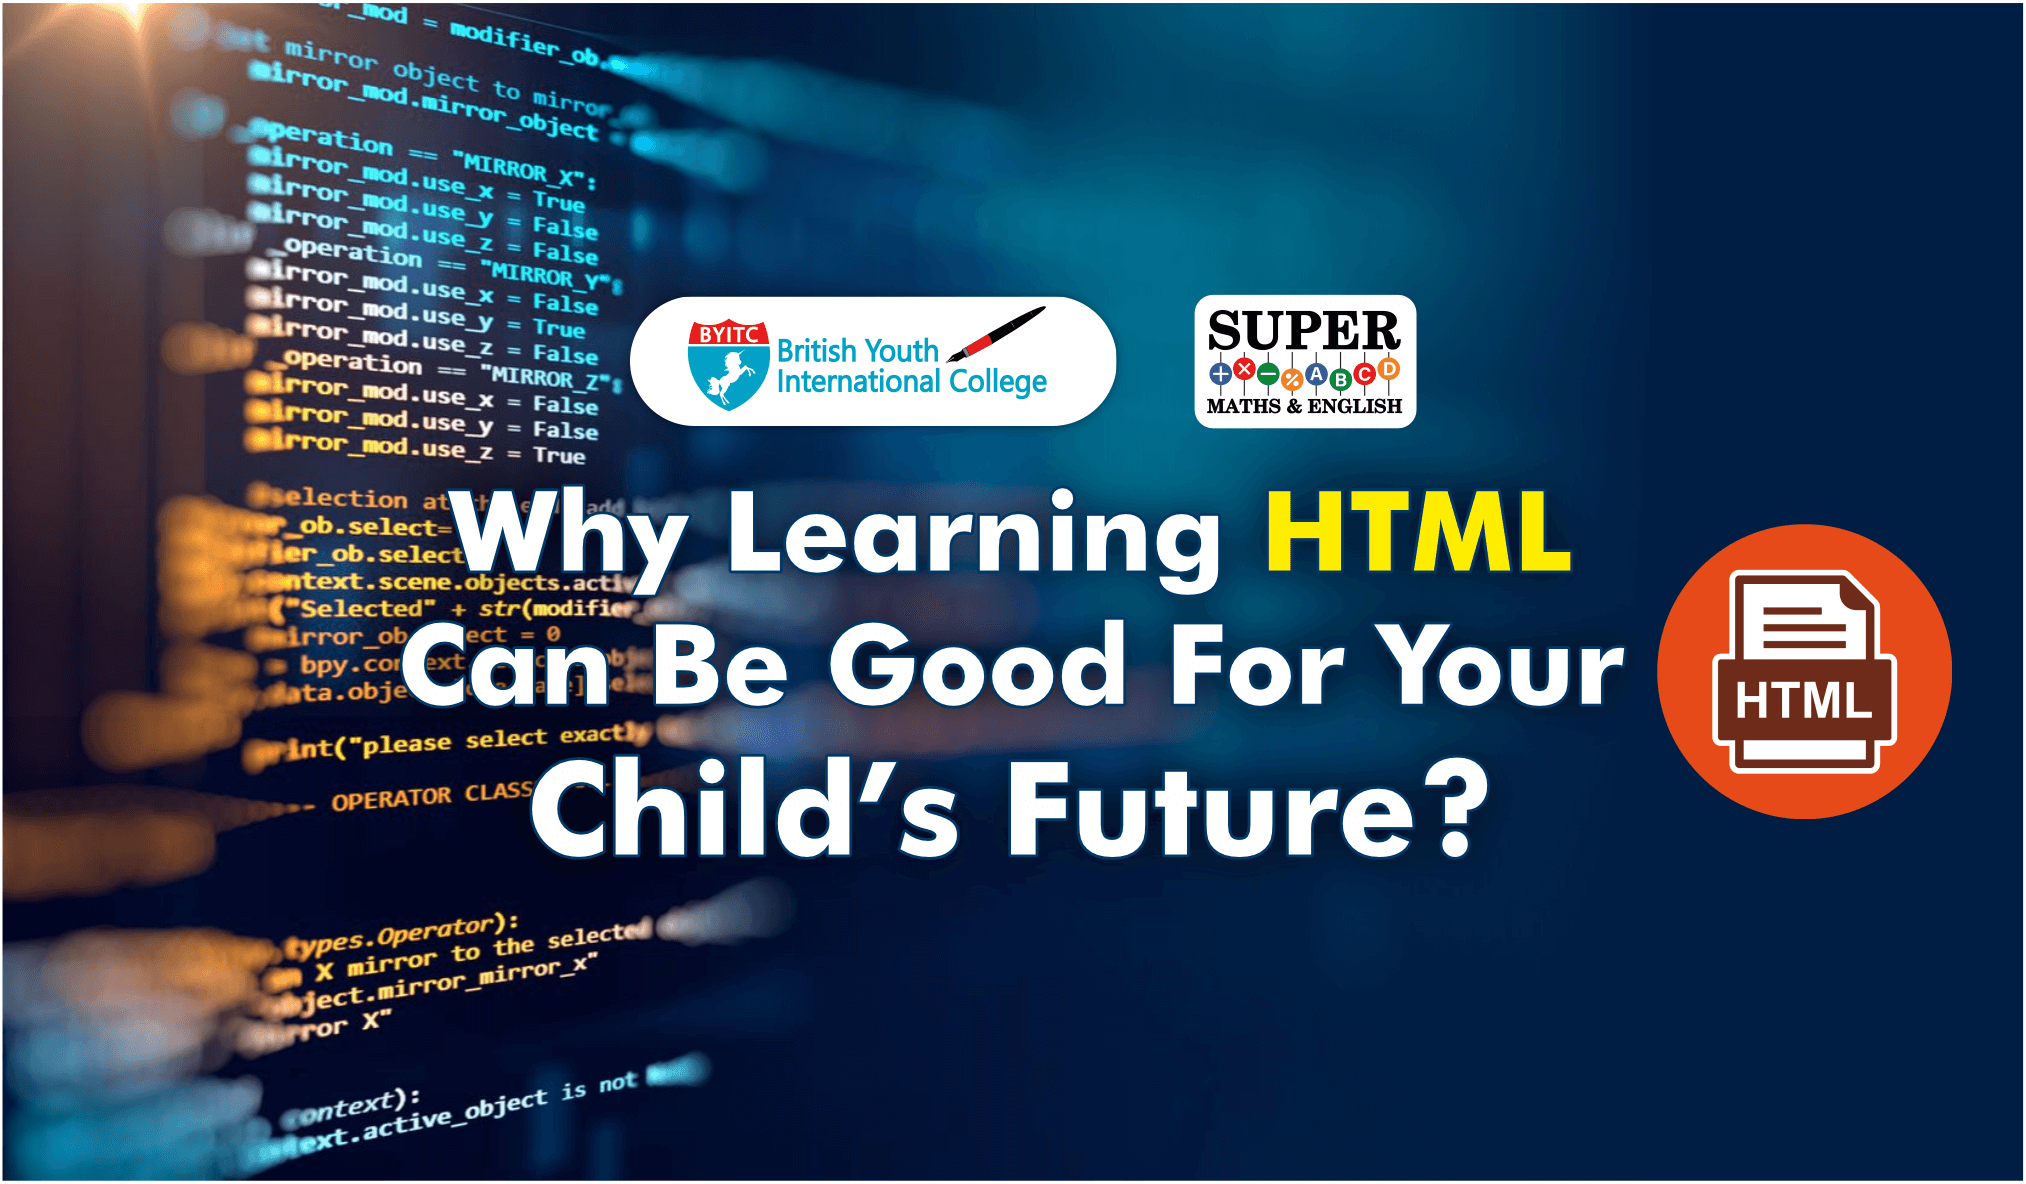 Learning HTML